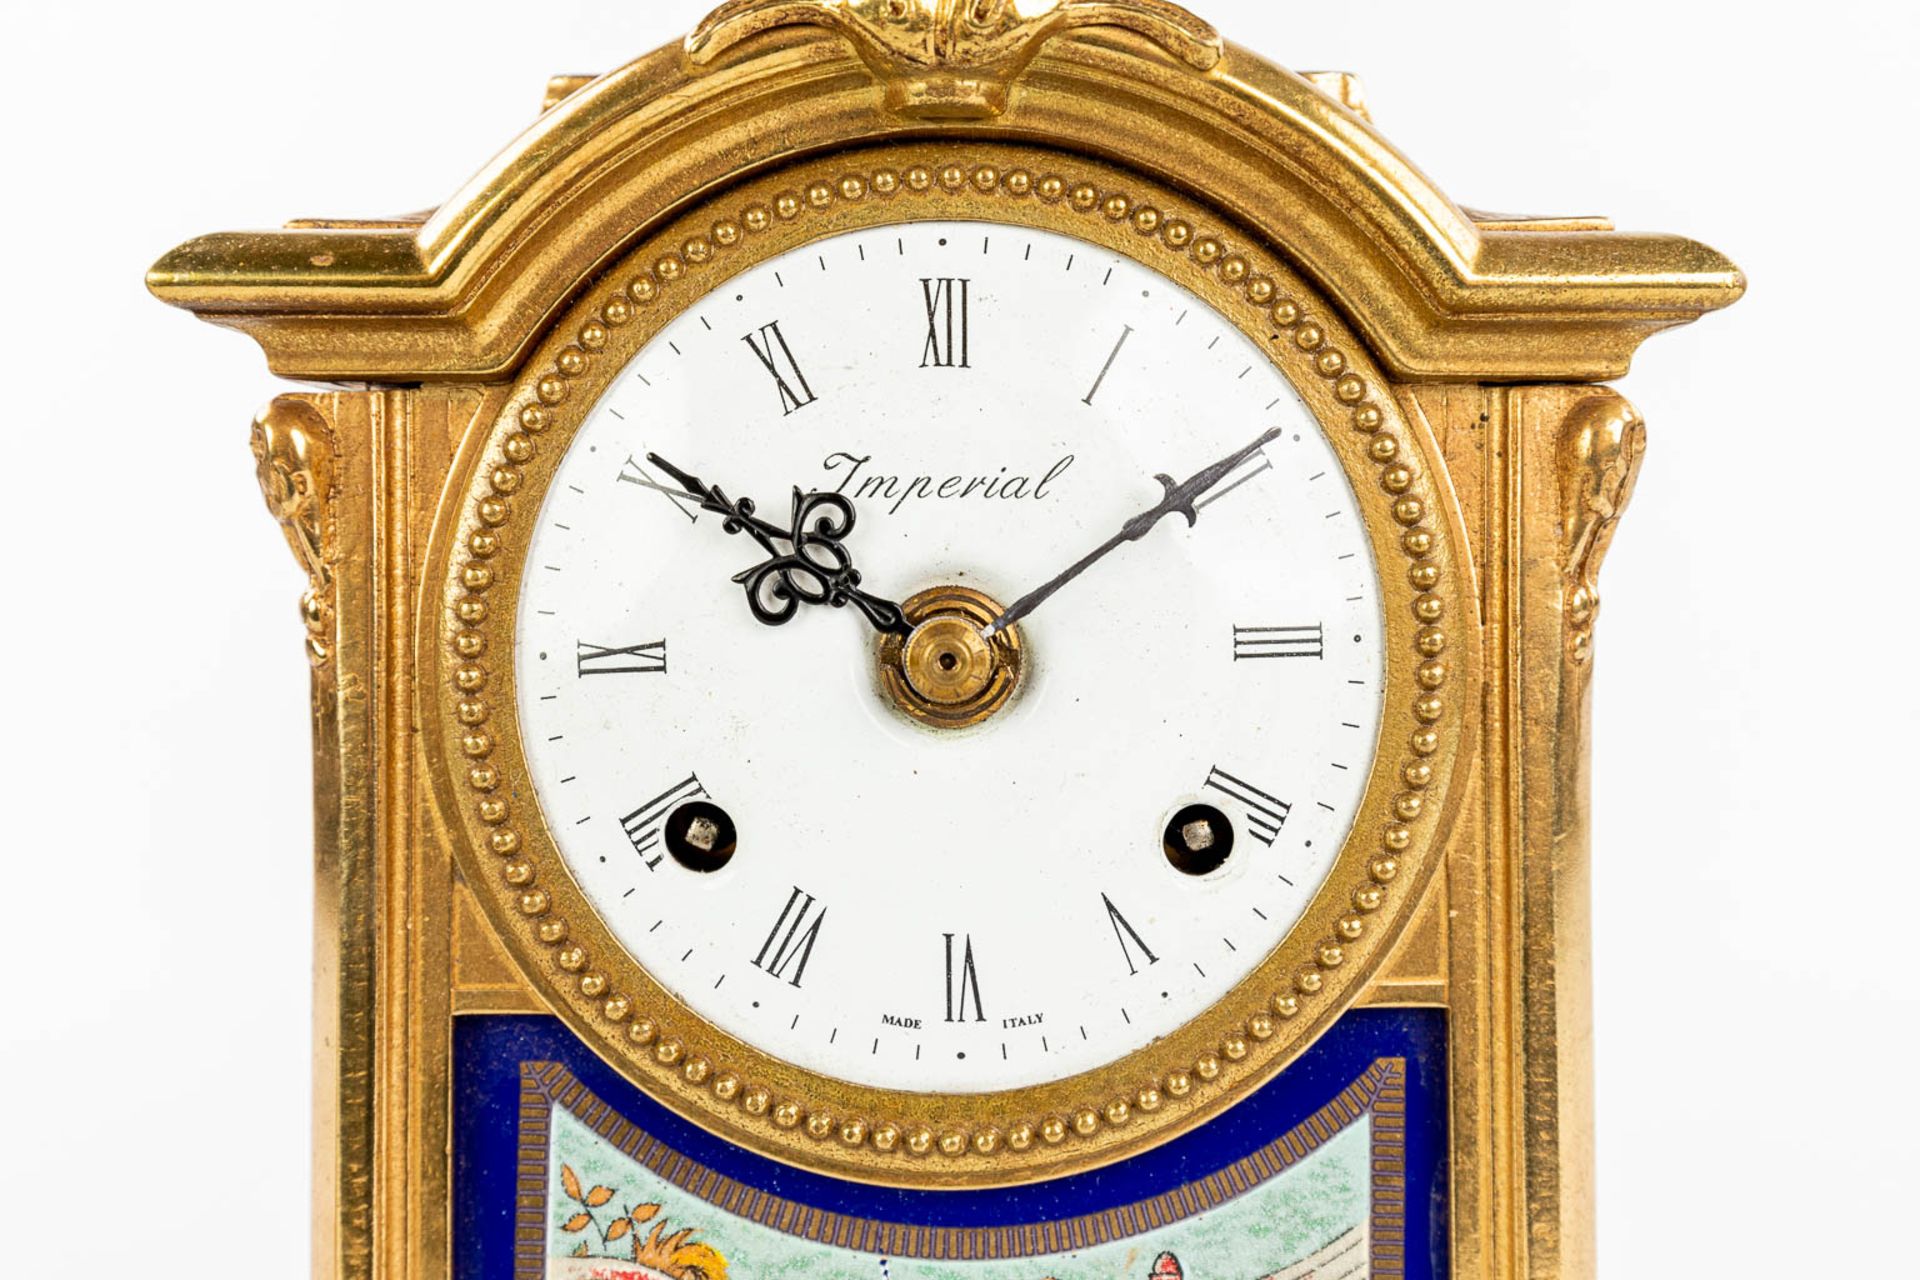 A three-piece mantle garniture clock made of bronze and porcelain and marked Imperial. (H:43cm) - Image 9 of 12